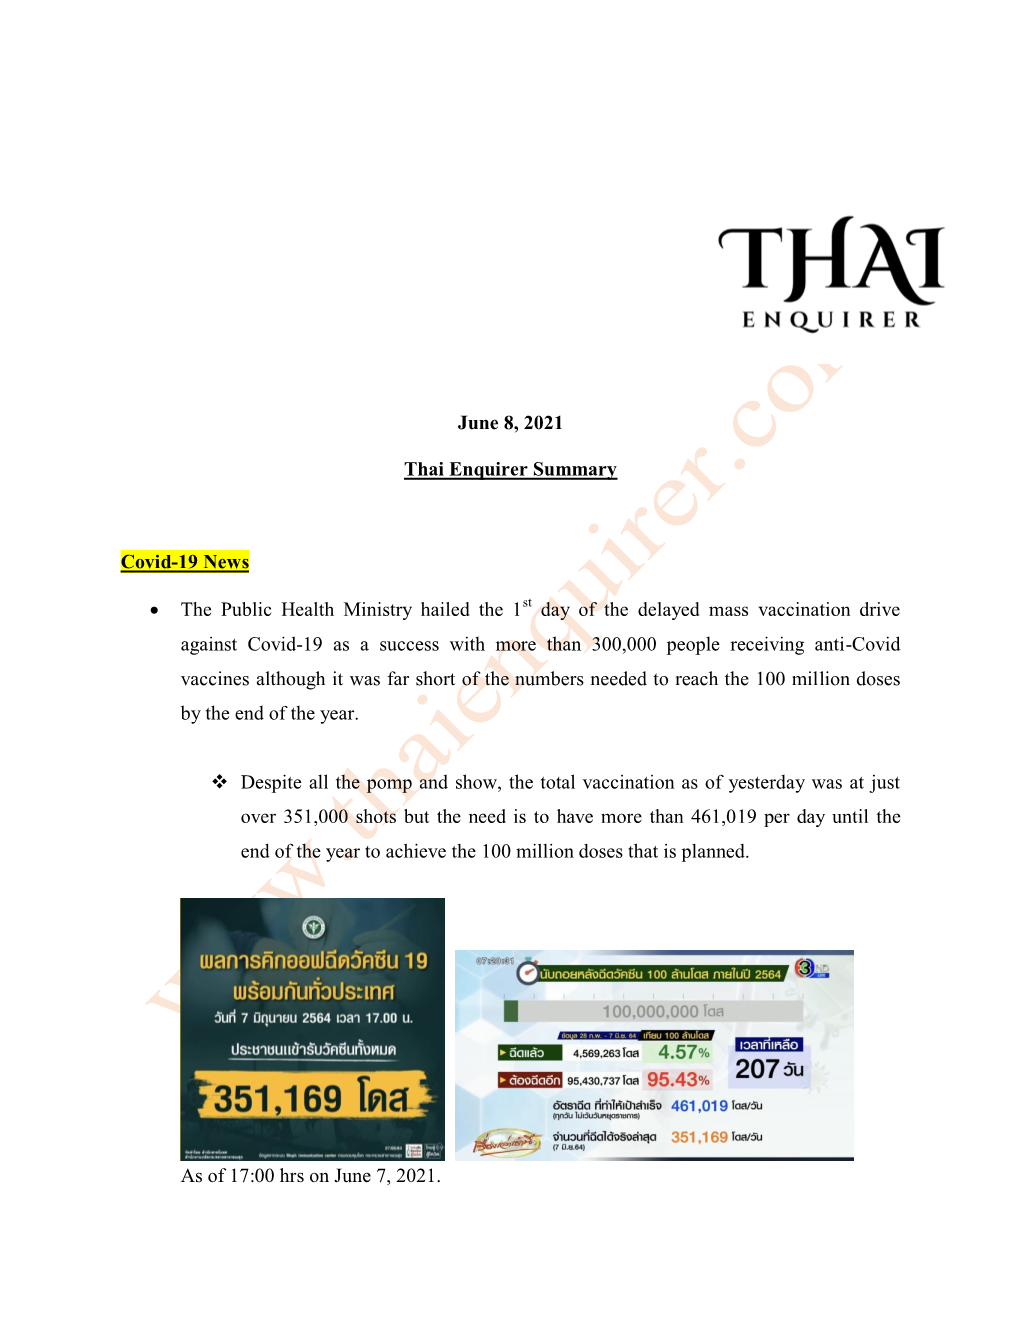 June 8, 2021 Thai Enquirer Summary Covid-19 News • the Public Health Ministry Hailed the 1 Day of the Delayed Mass Vaccination